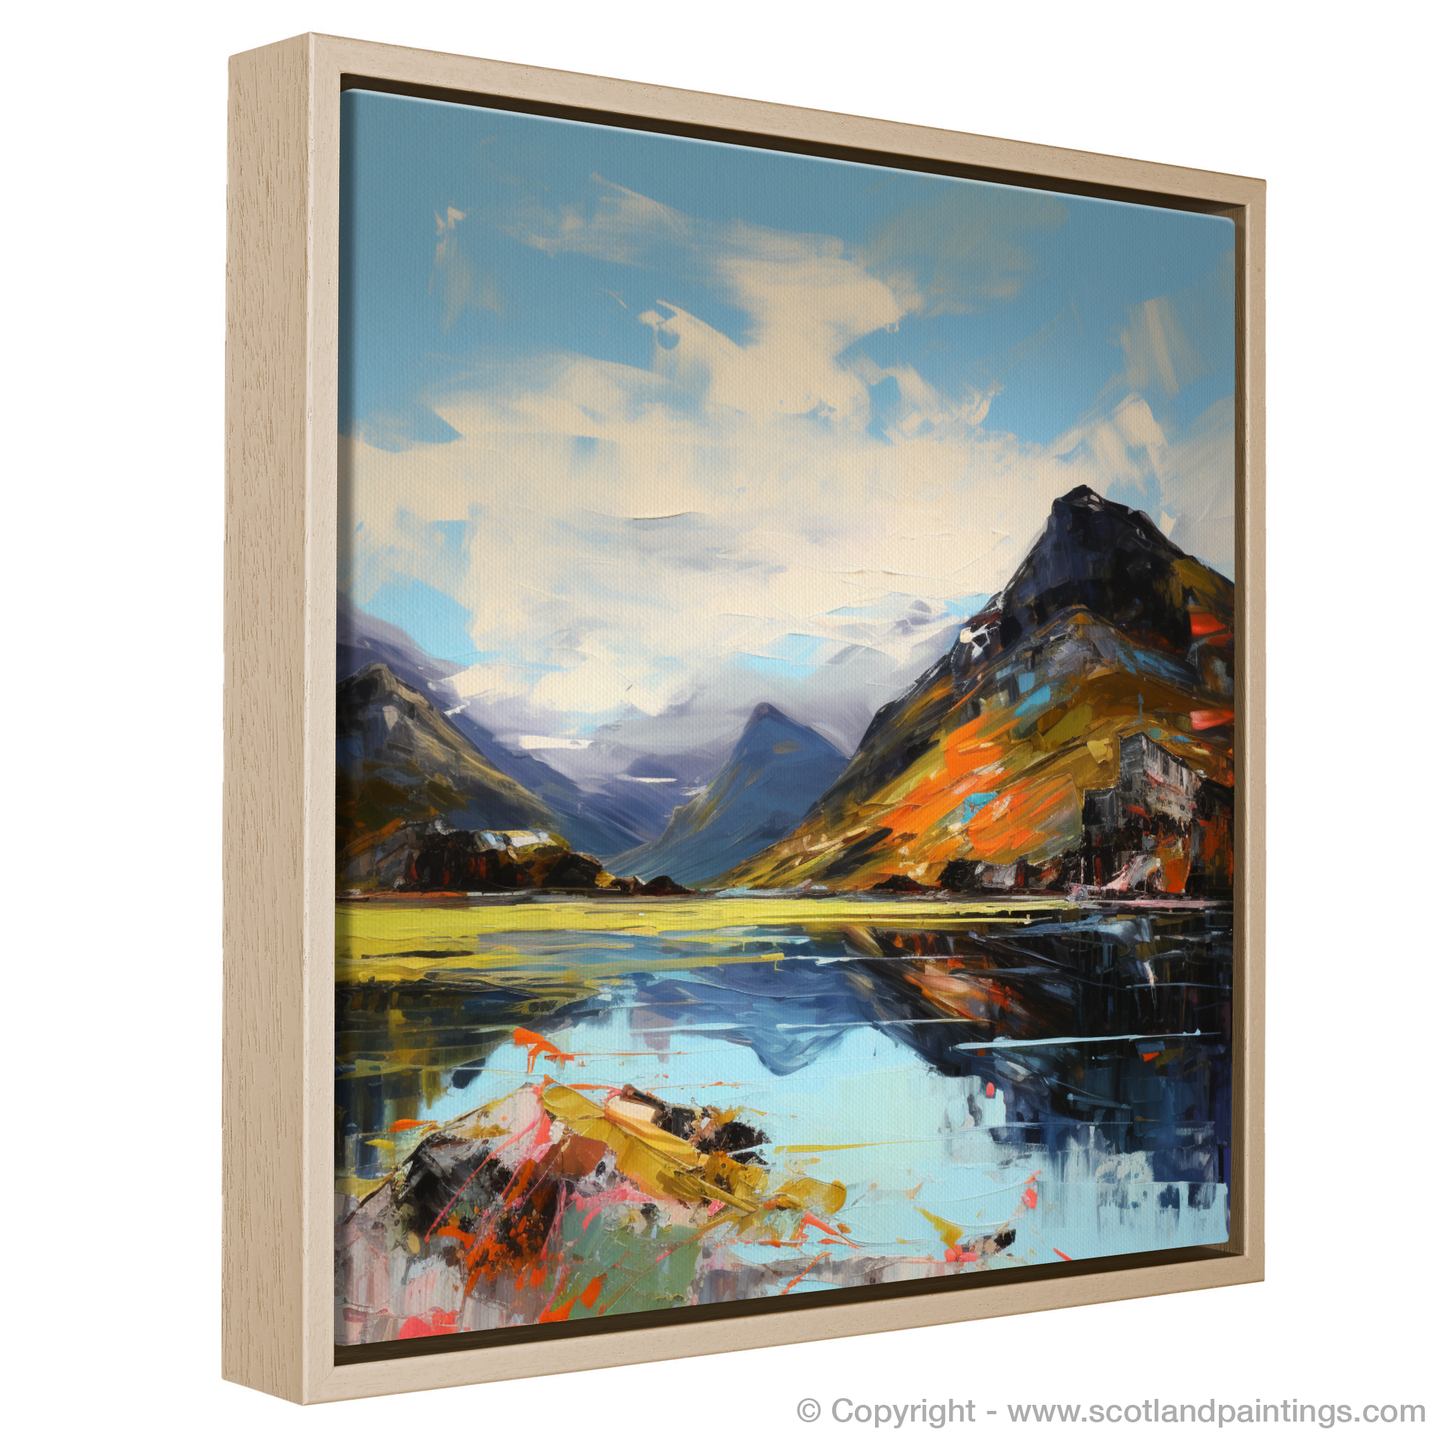 Painting and Art Print of Loch Glencoul, Sutherland entitled "Wild Rhapsody of Loch Glencoul".